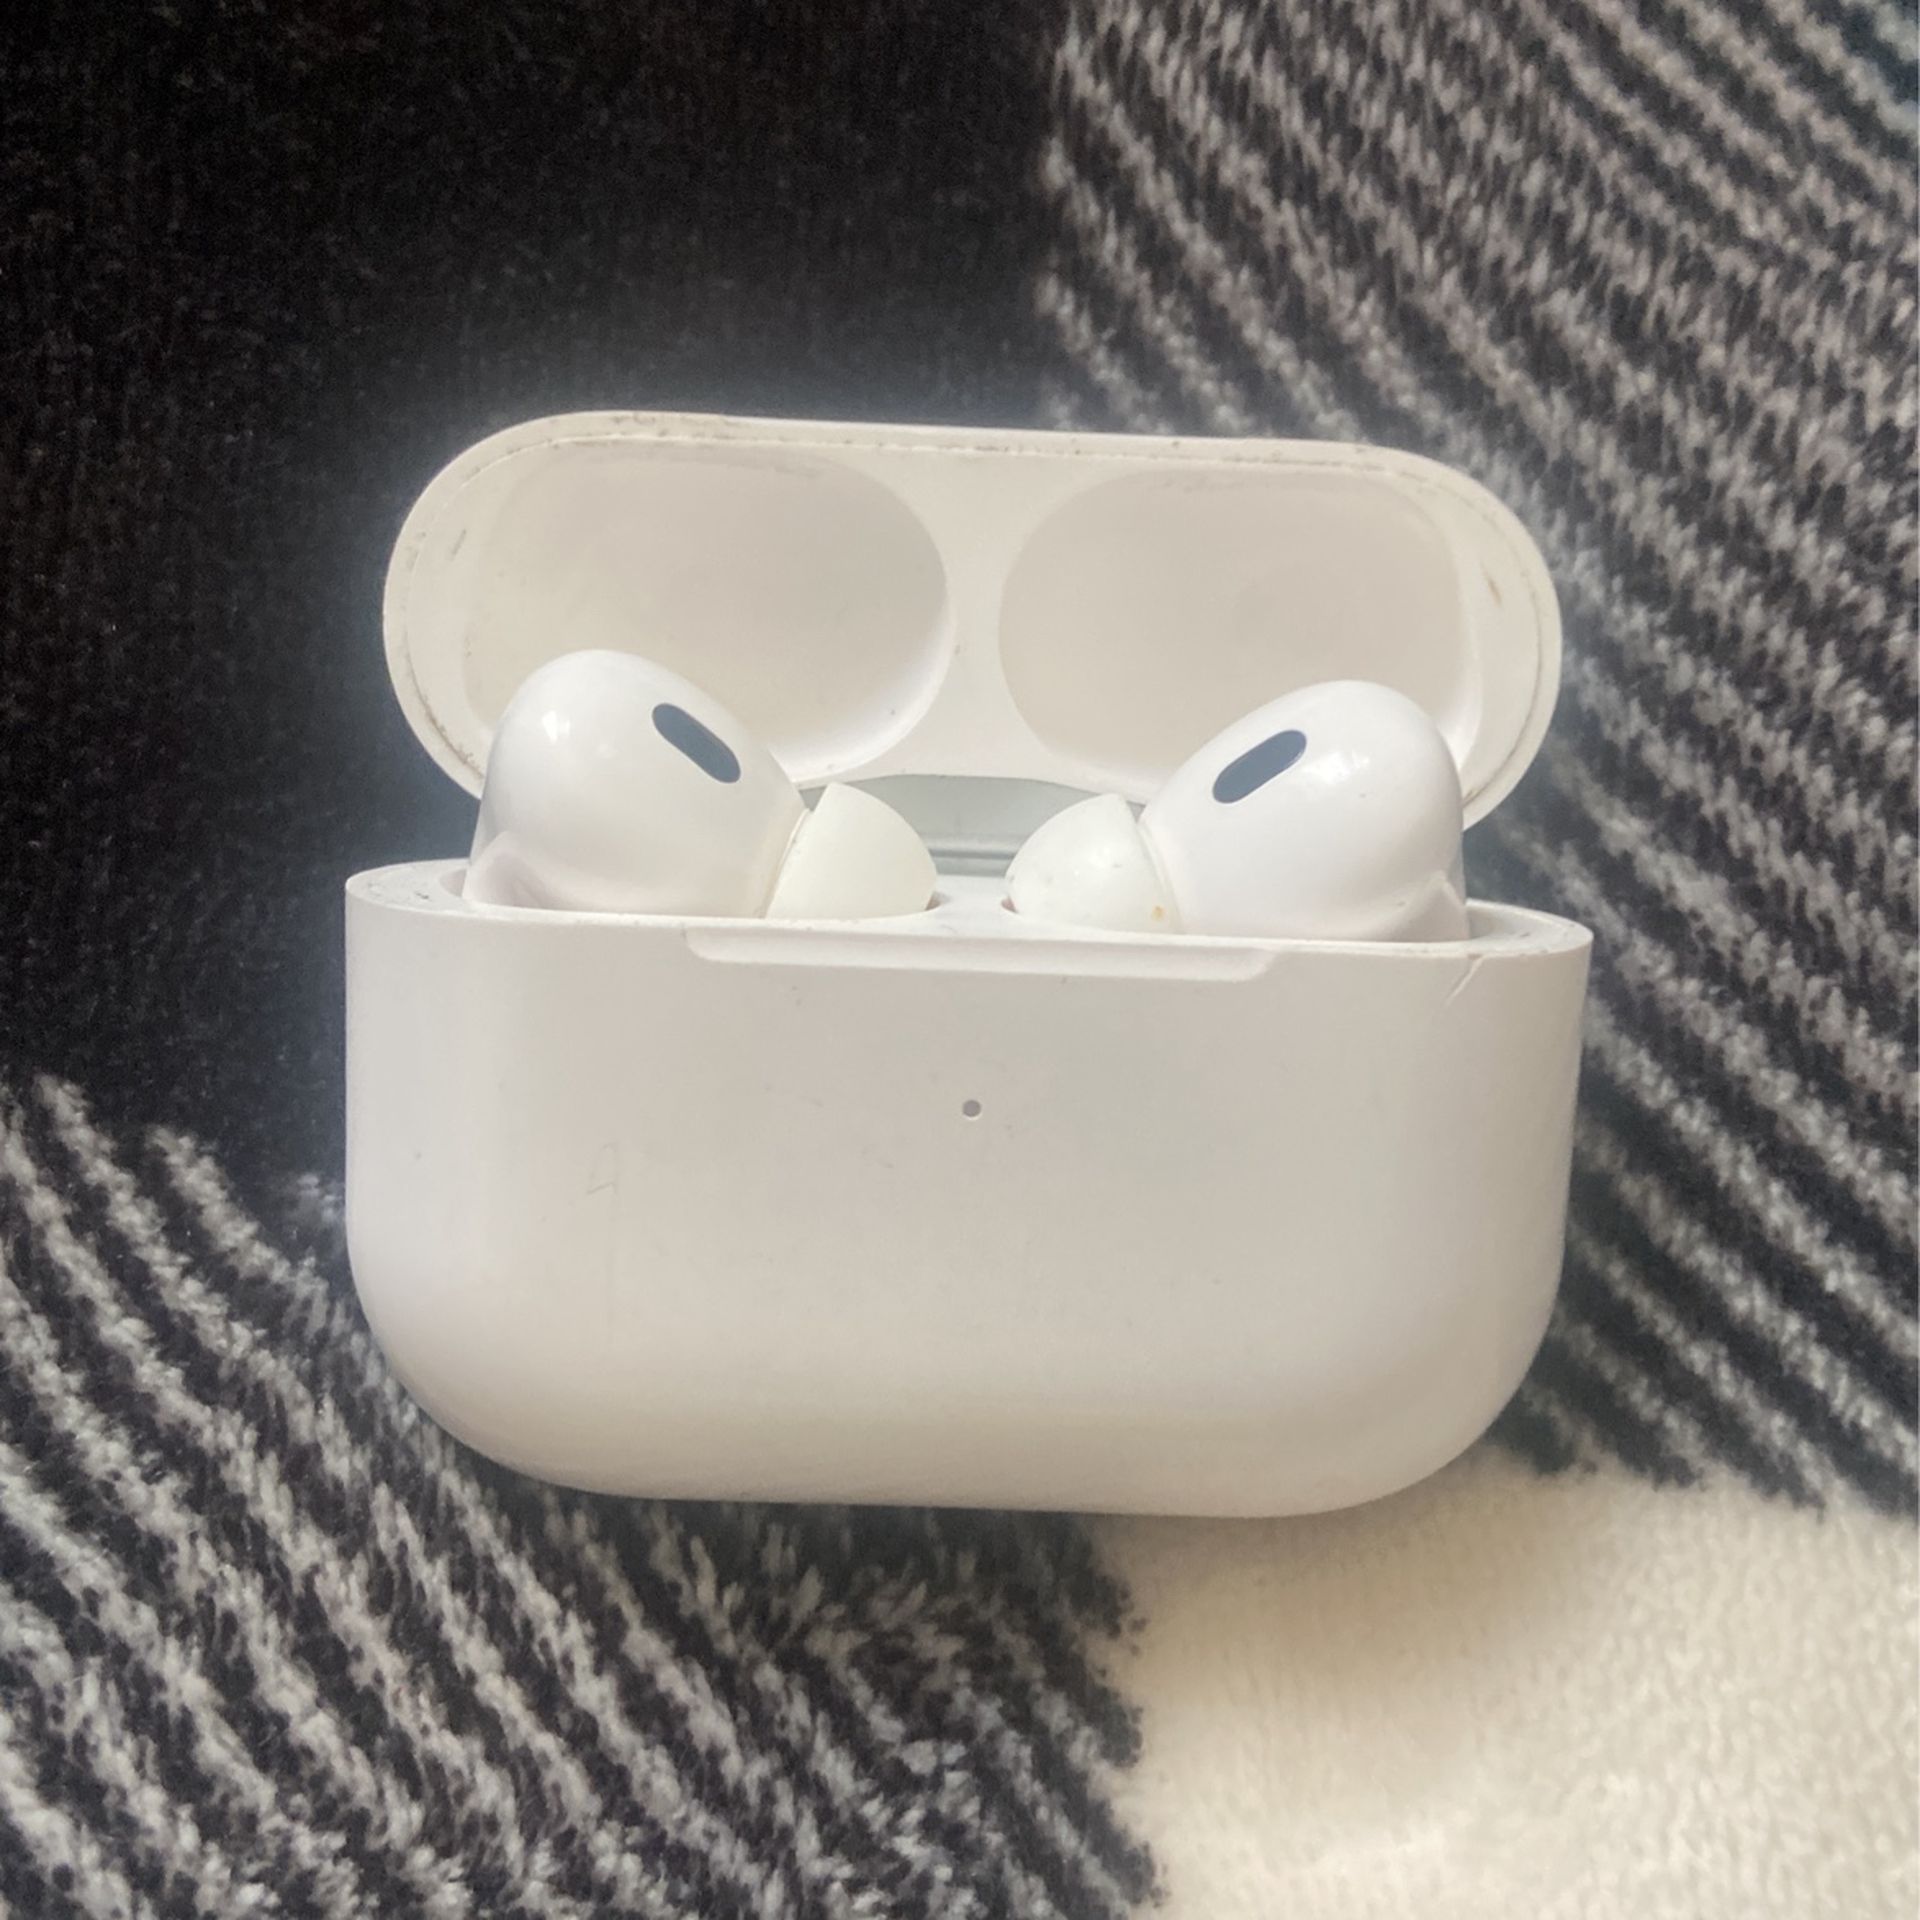 AirPods Pro (2nd Generation With MagSafe Case (USB- 